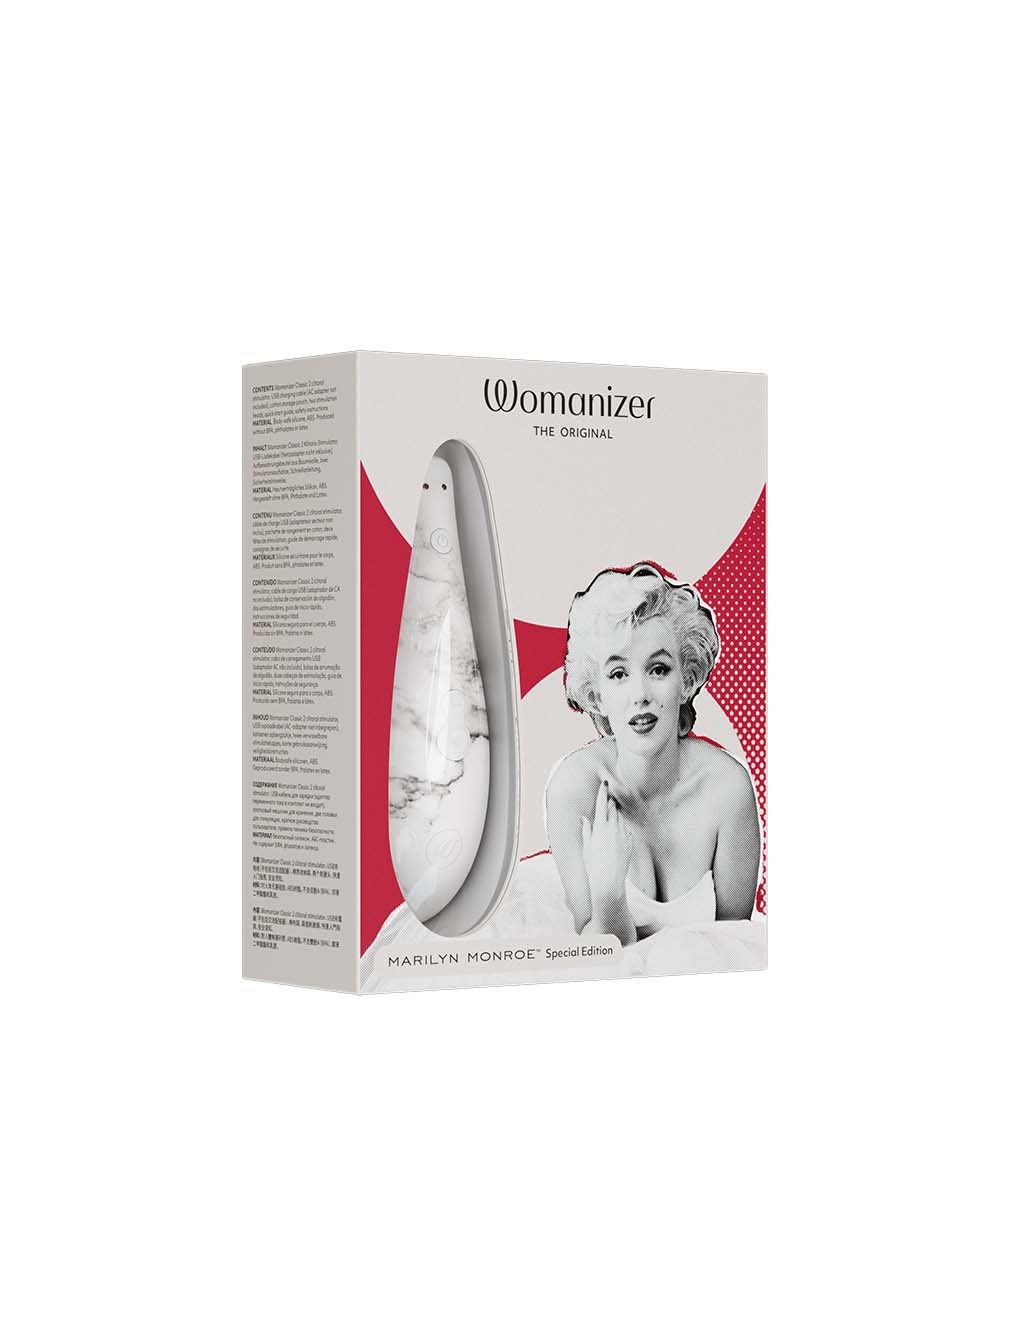 Marilyn Monroe Womanizer Classic 2 Special Edition